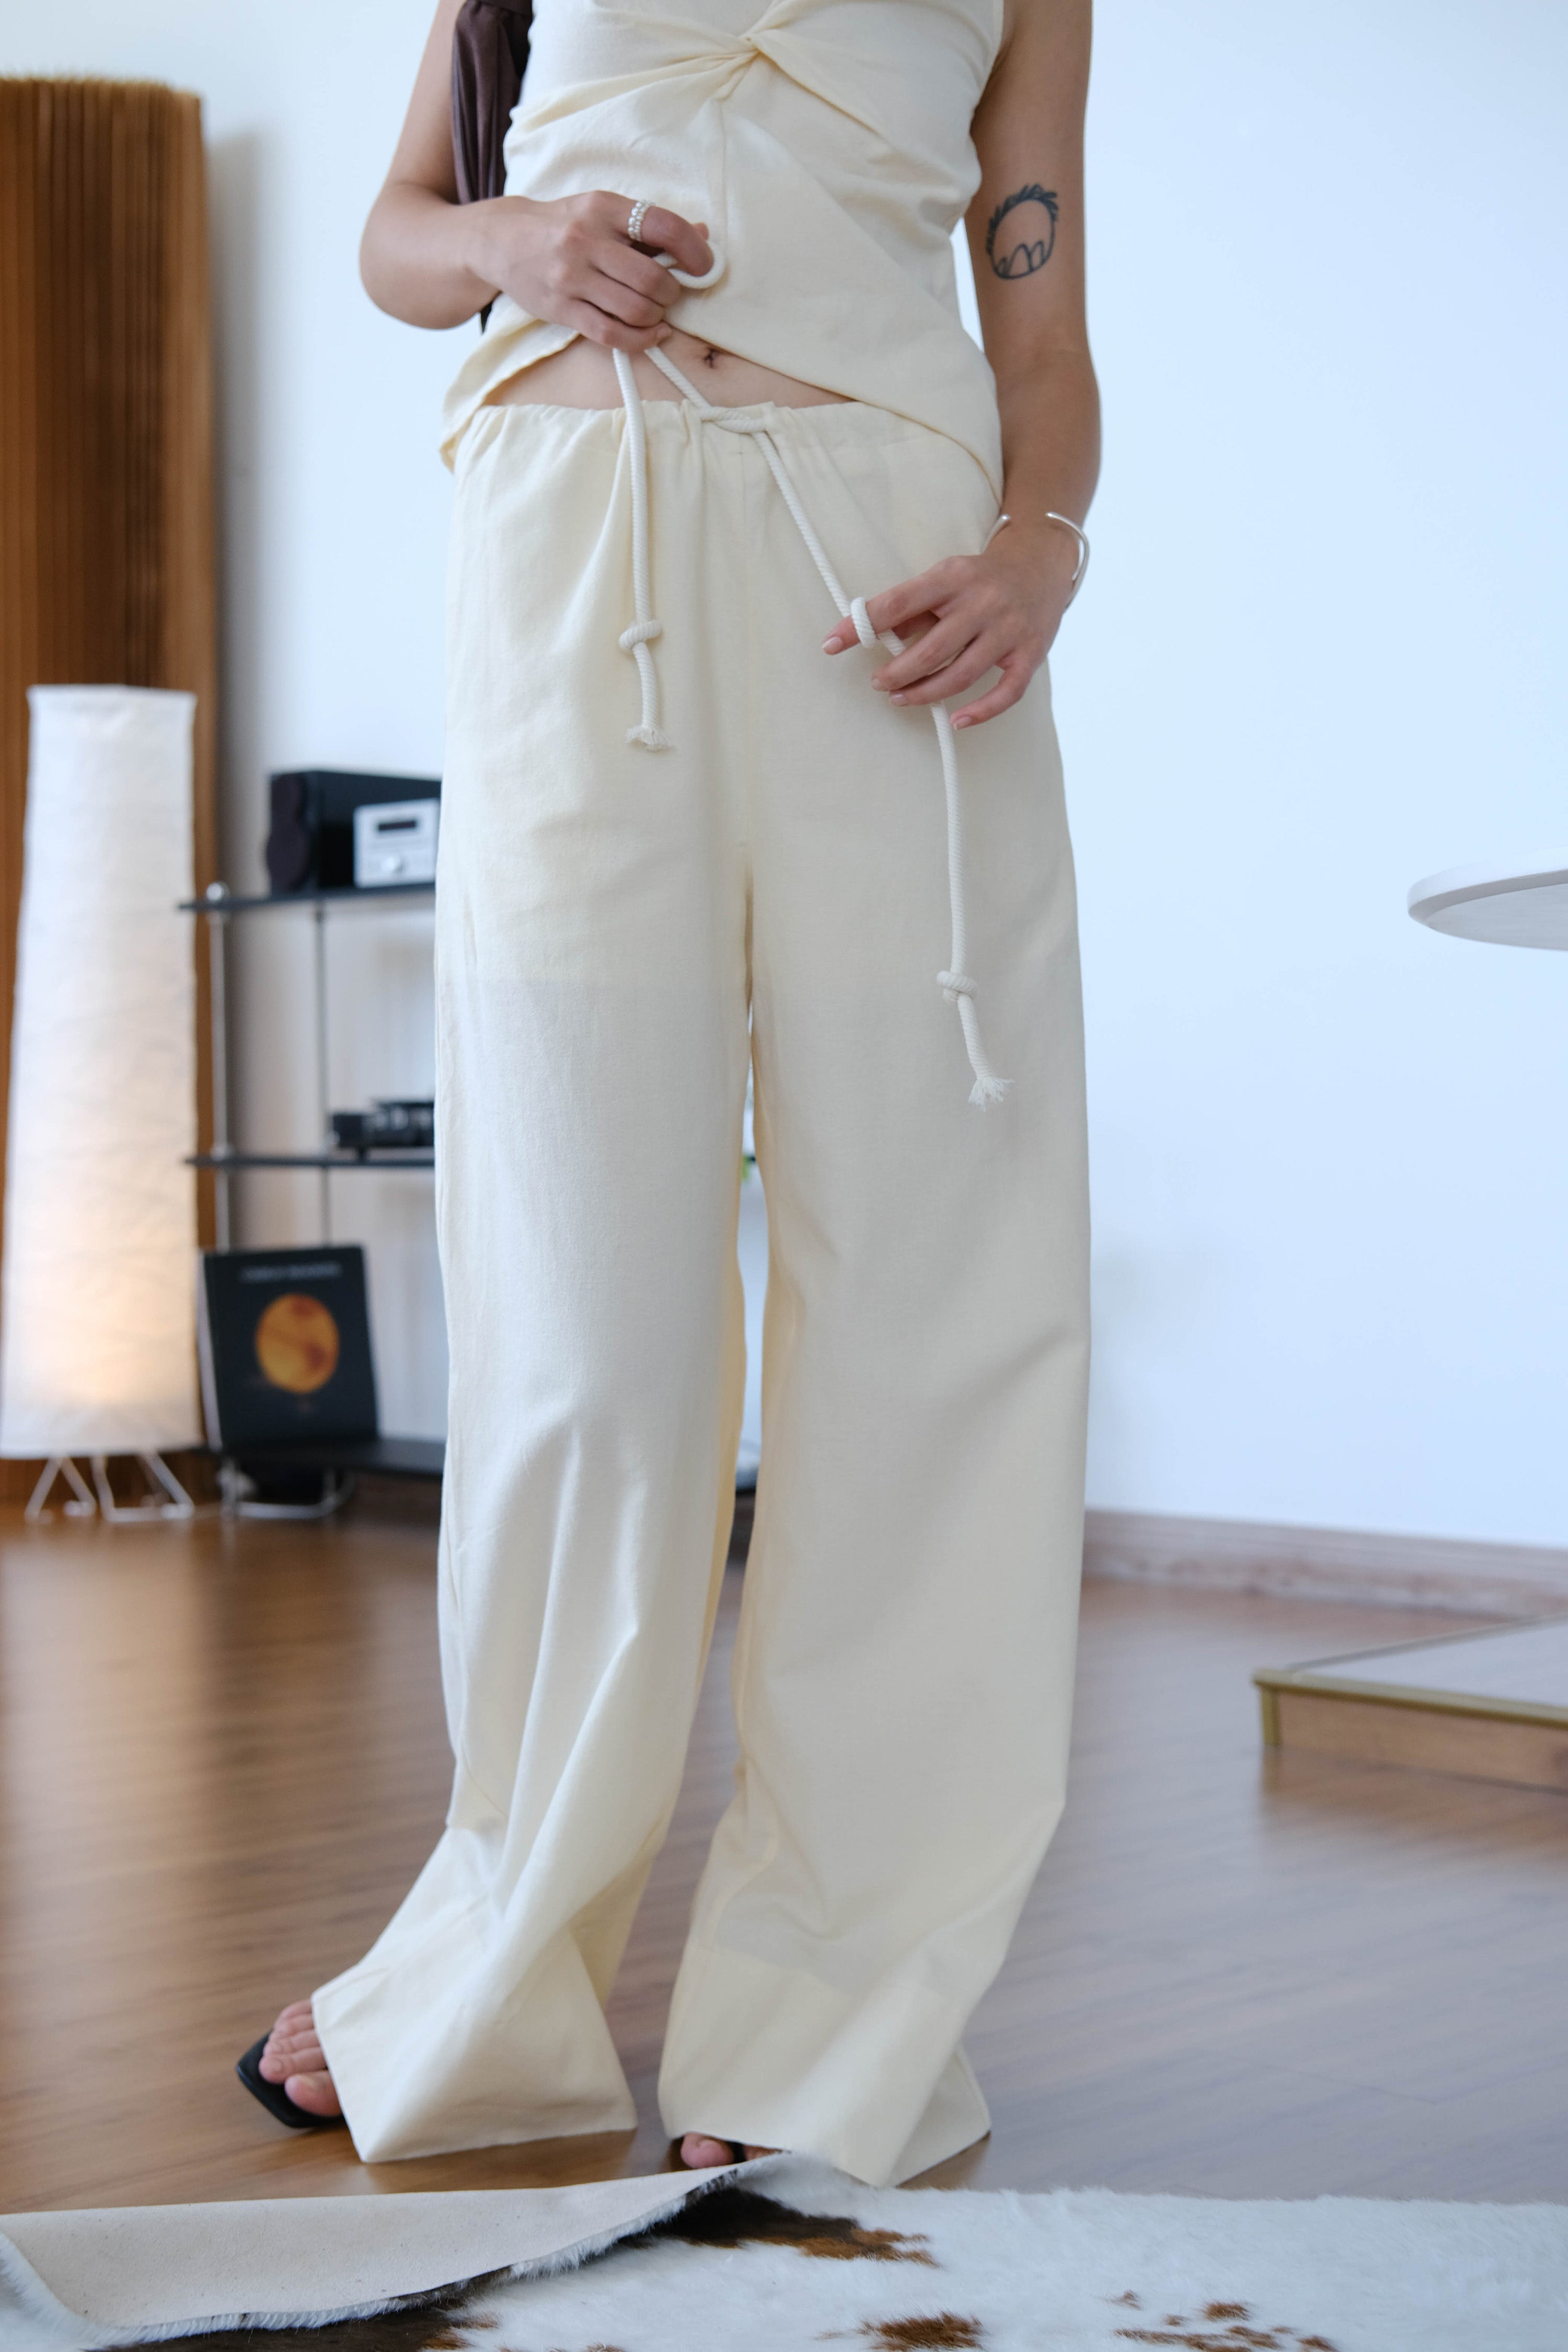 Buy High Waist Trousers, Wide Leg Pants, Red Wide Leg Pants, Palazzo Pants  for Women, Women Pants With Pockets, Business Casual Wide Pants Women  Online in India - Etsy